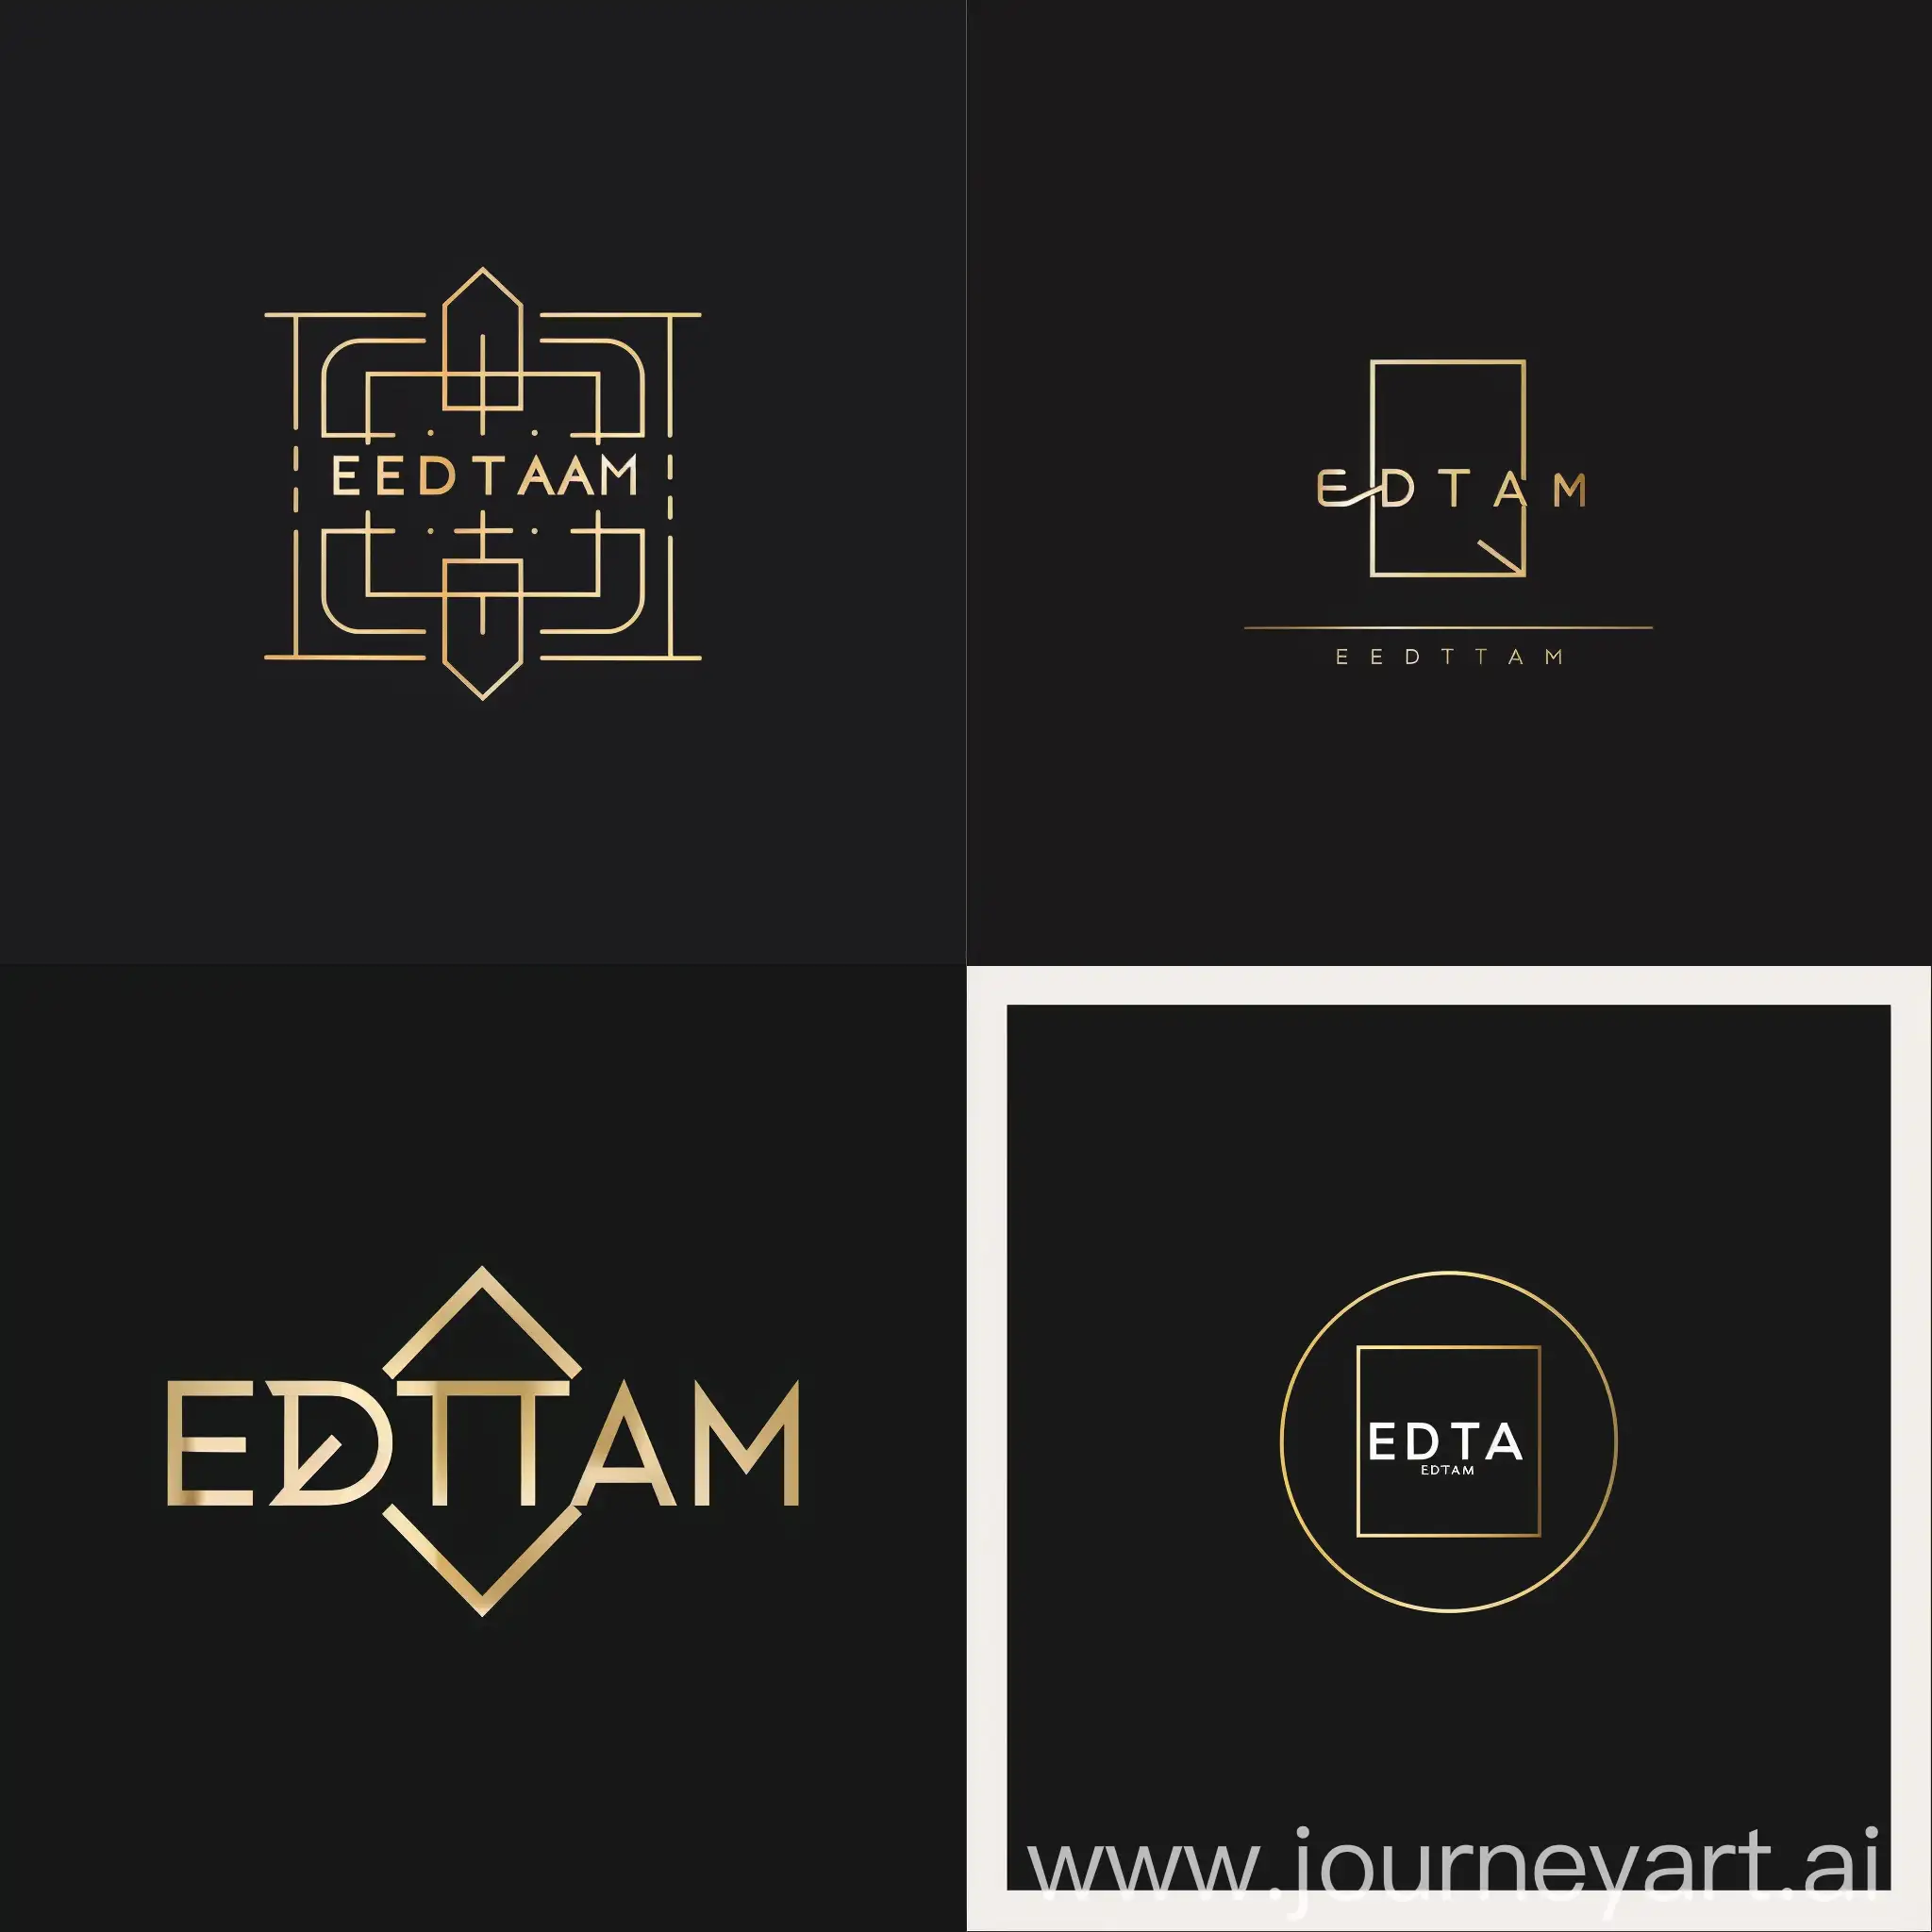 Minimalistic-EDTAM-Logo-Design-with-Clean-Lines-and-Symmetry